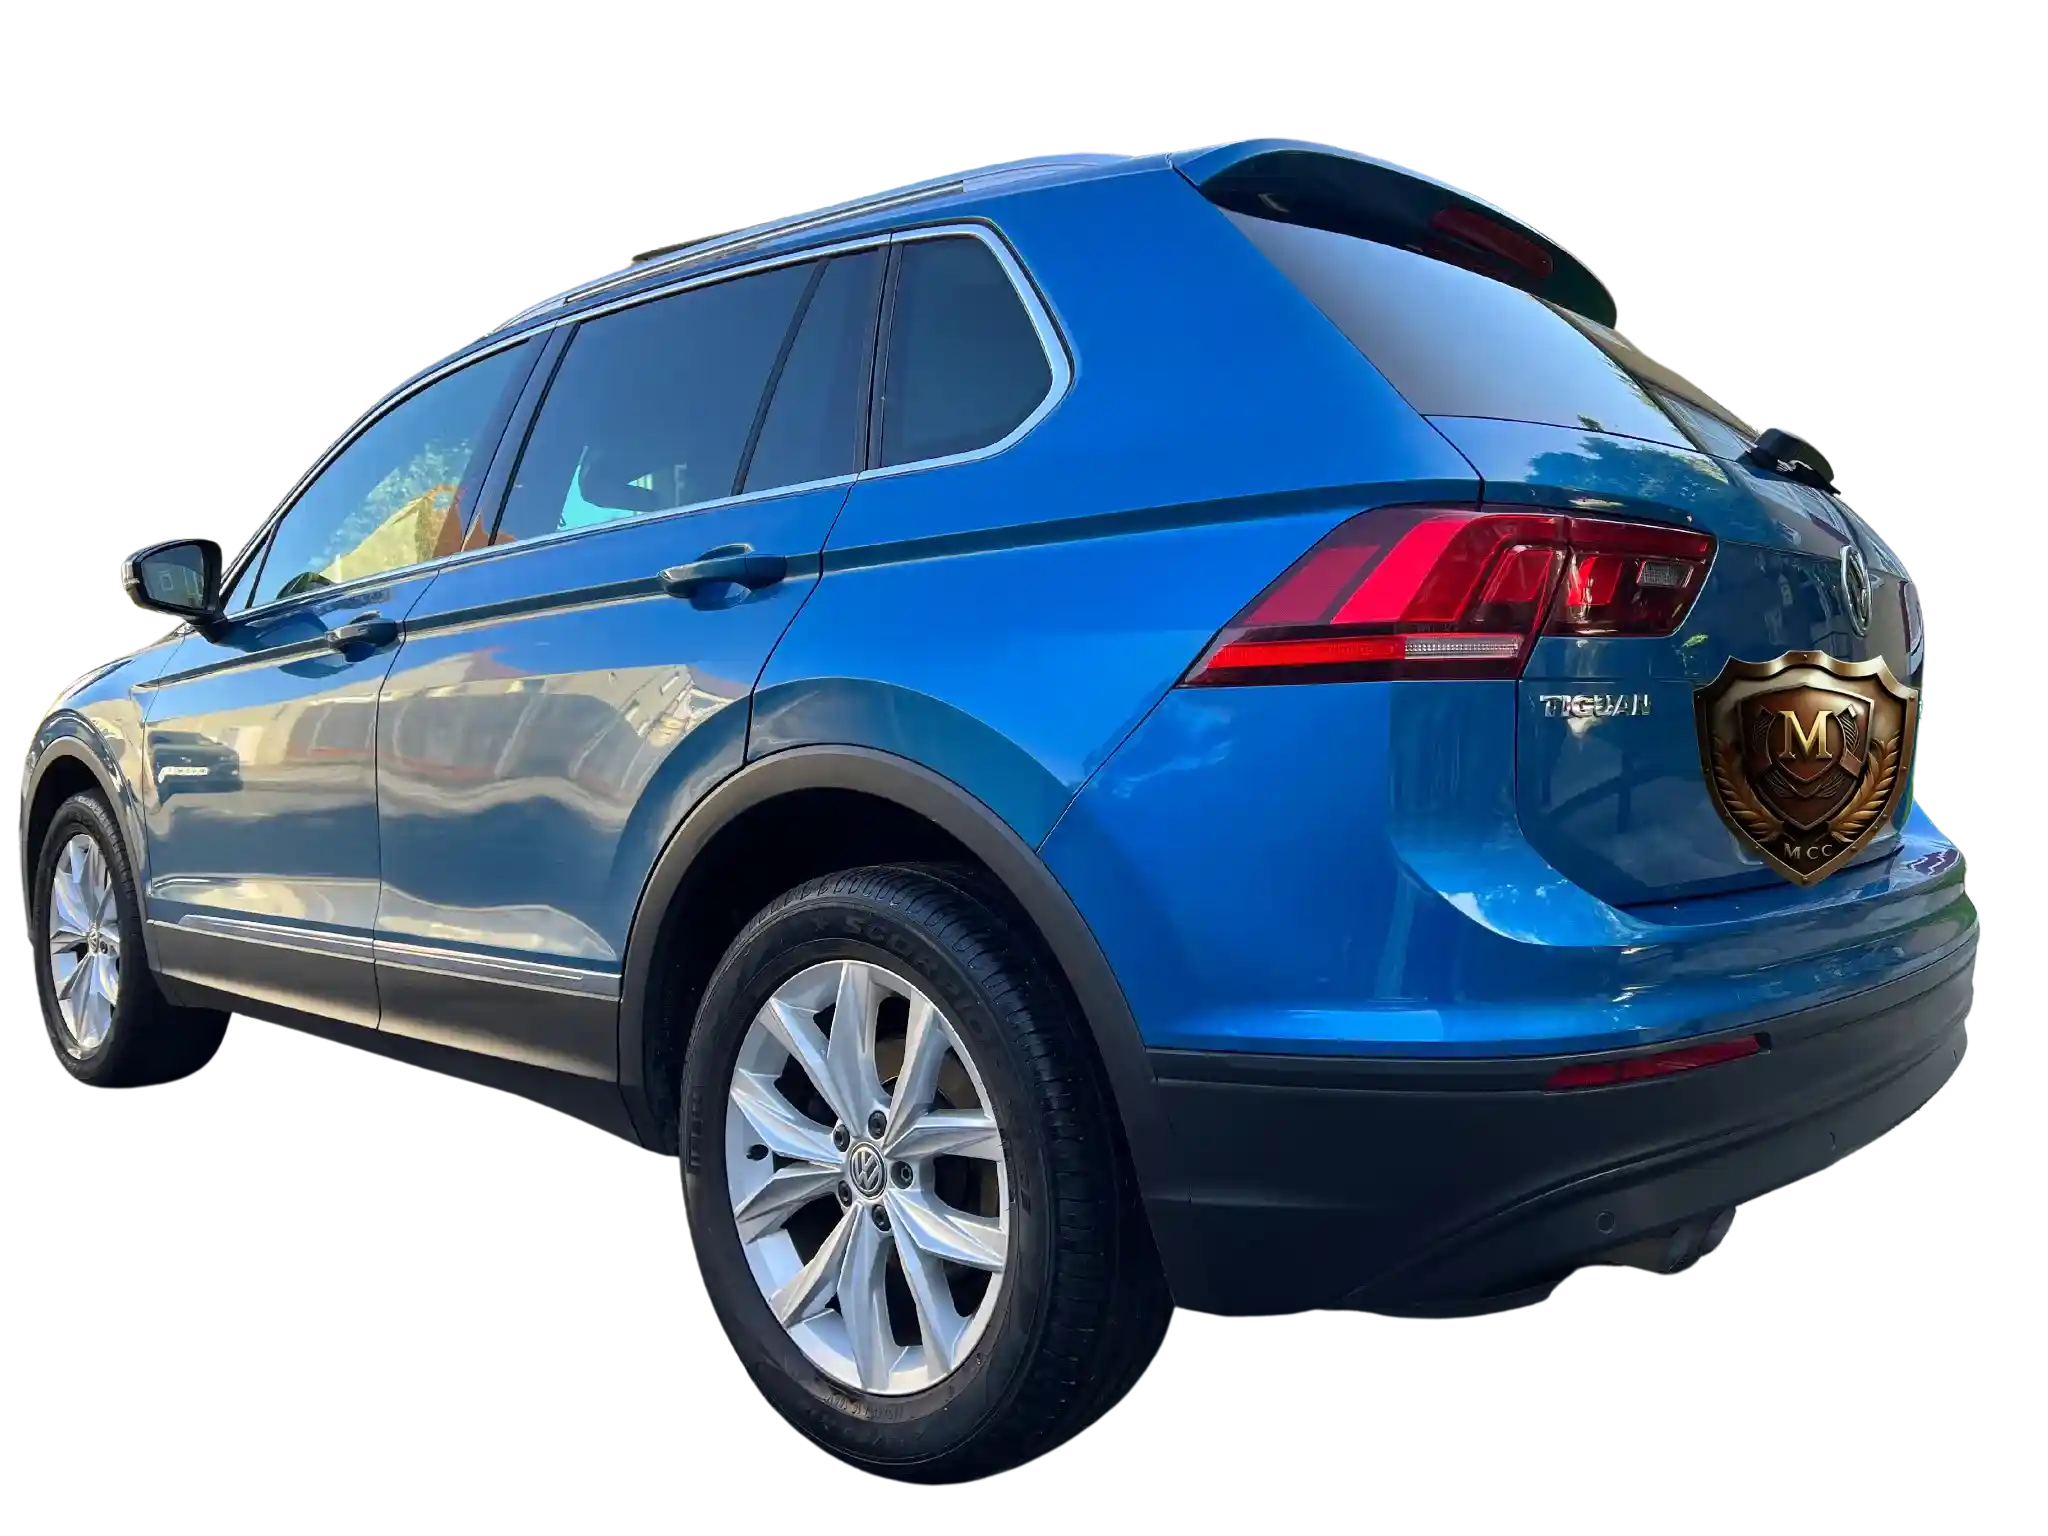 Eco-friendly waterless valeting of a Volkswagen Tiguan 4Motion in Kingston-upon-thames, enhancing its rugged elegance and reflecting corporate environmental values.